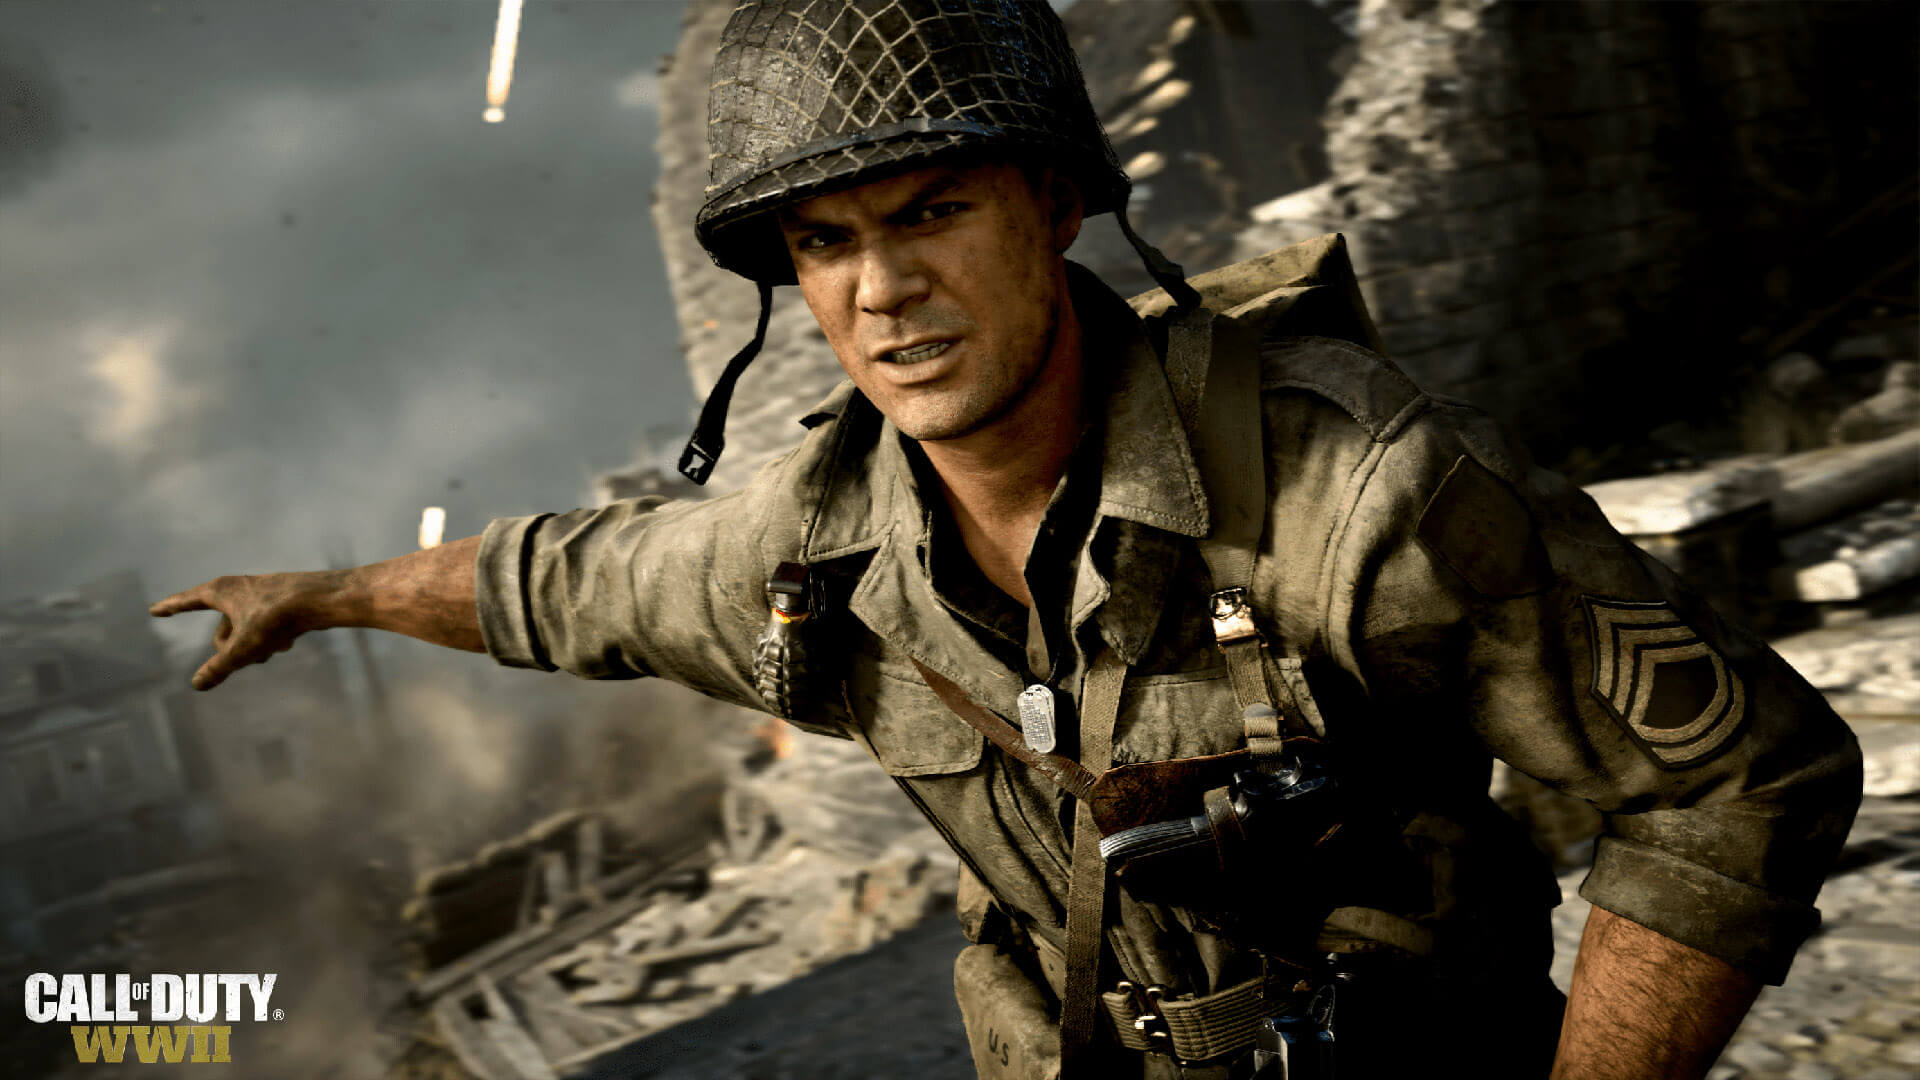 CoD Vanguard To Include New WWII Themed Warzone Map, Reveal Later This Year